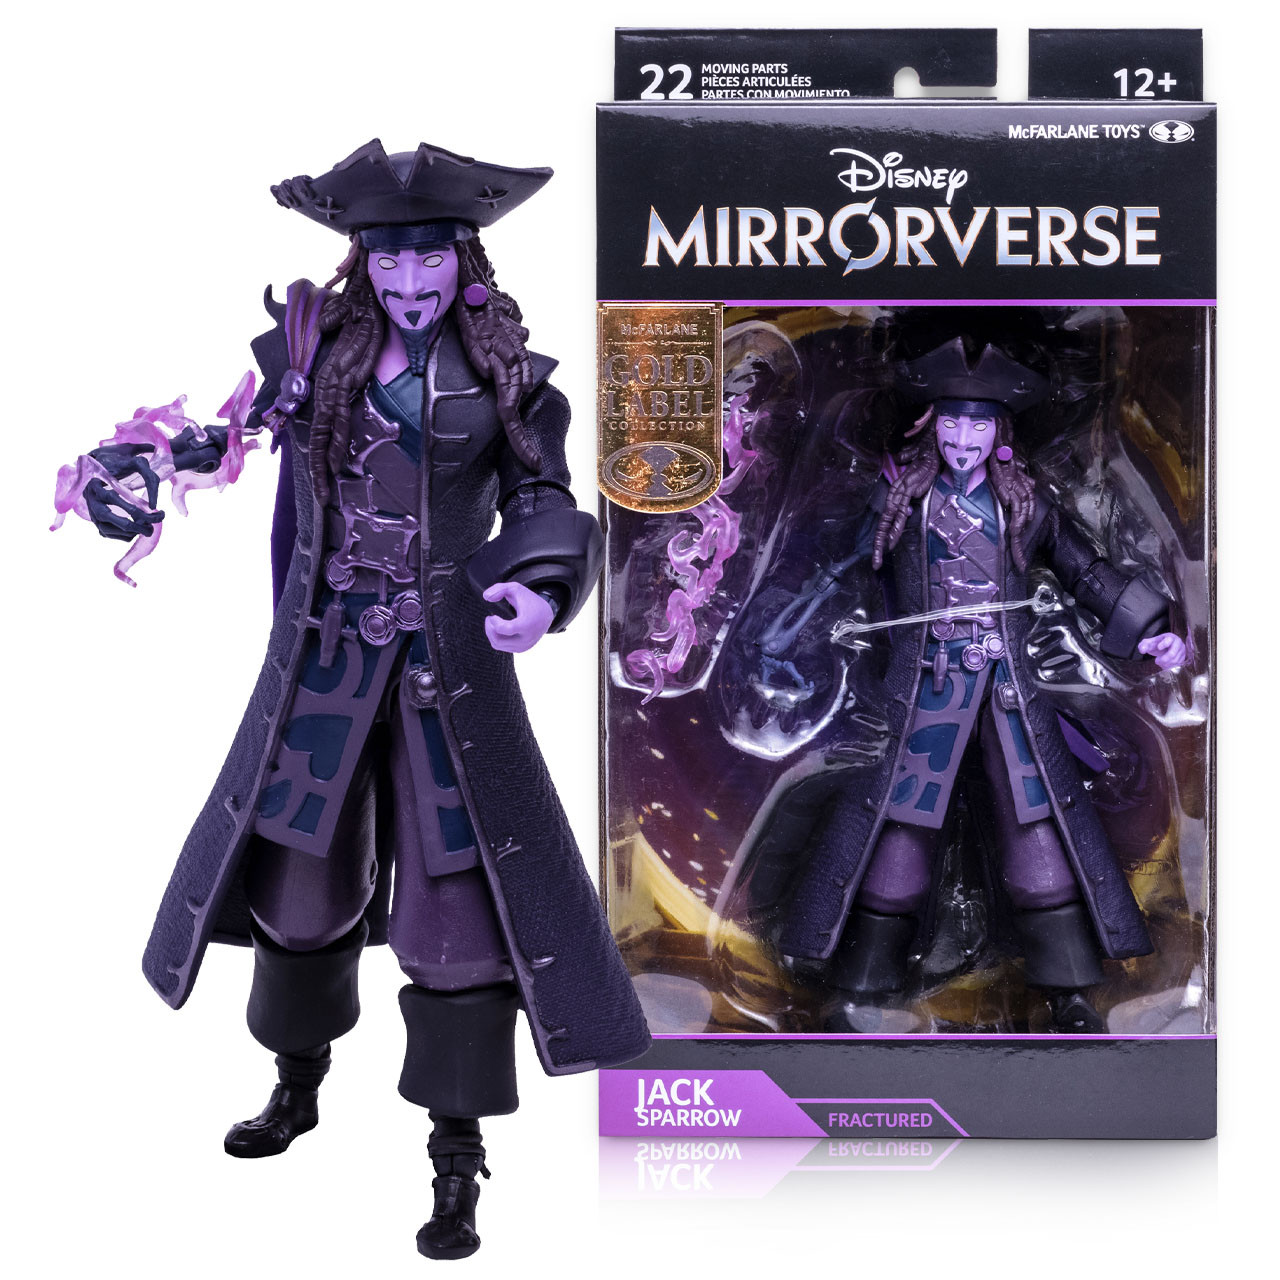 Our Captain Hook 7 figure based on the Disney Mirrorverse mobile